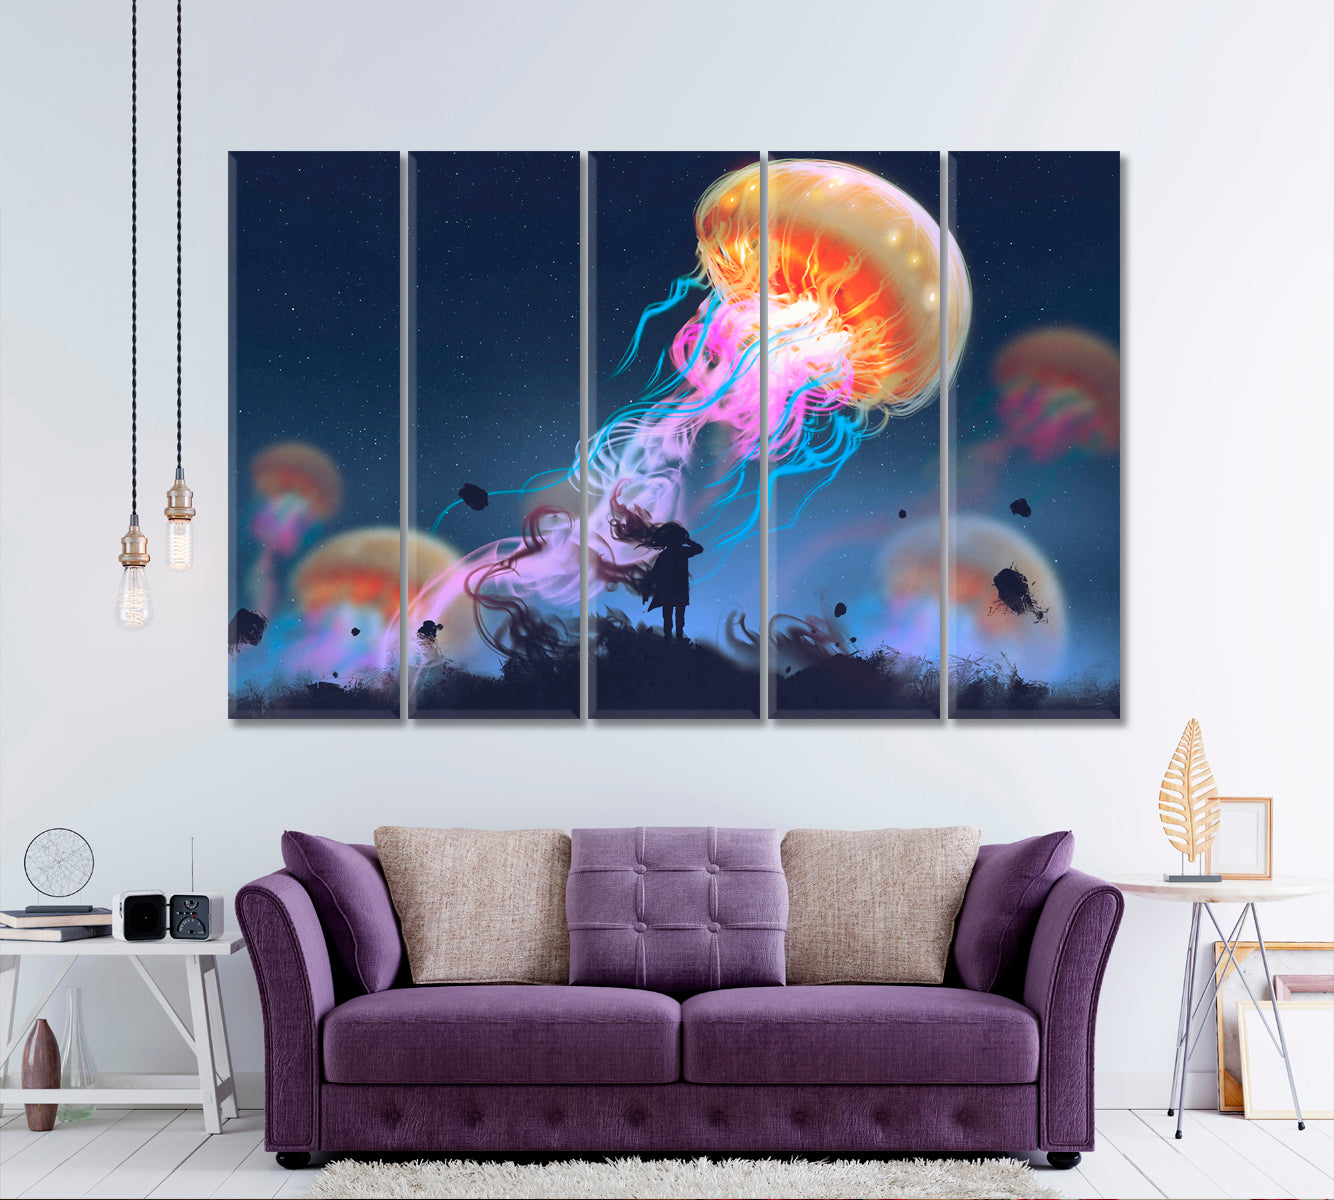 Giant Jellyfish Floating in Sky And Girl Surreal Painting Surreal Fantasy Large Art Print Décor Artesty 5 panels 36" x 24" 